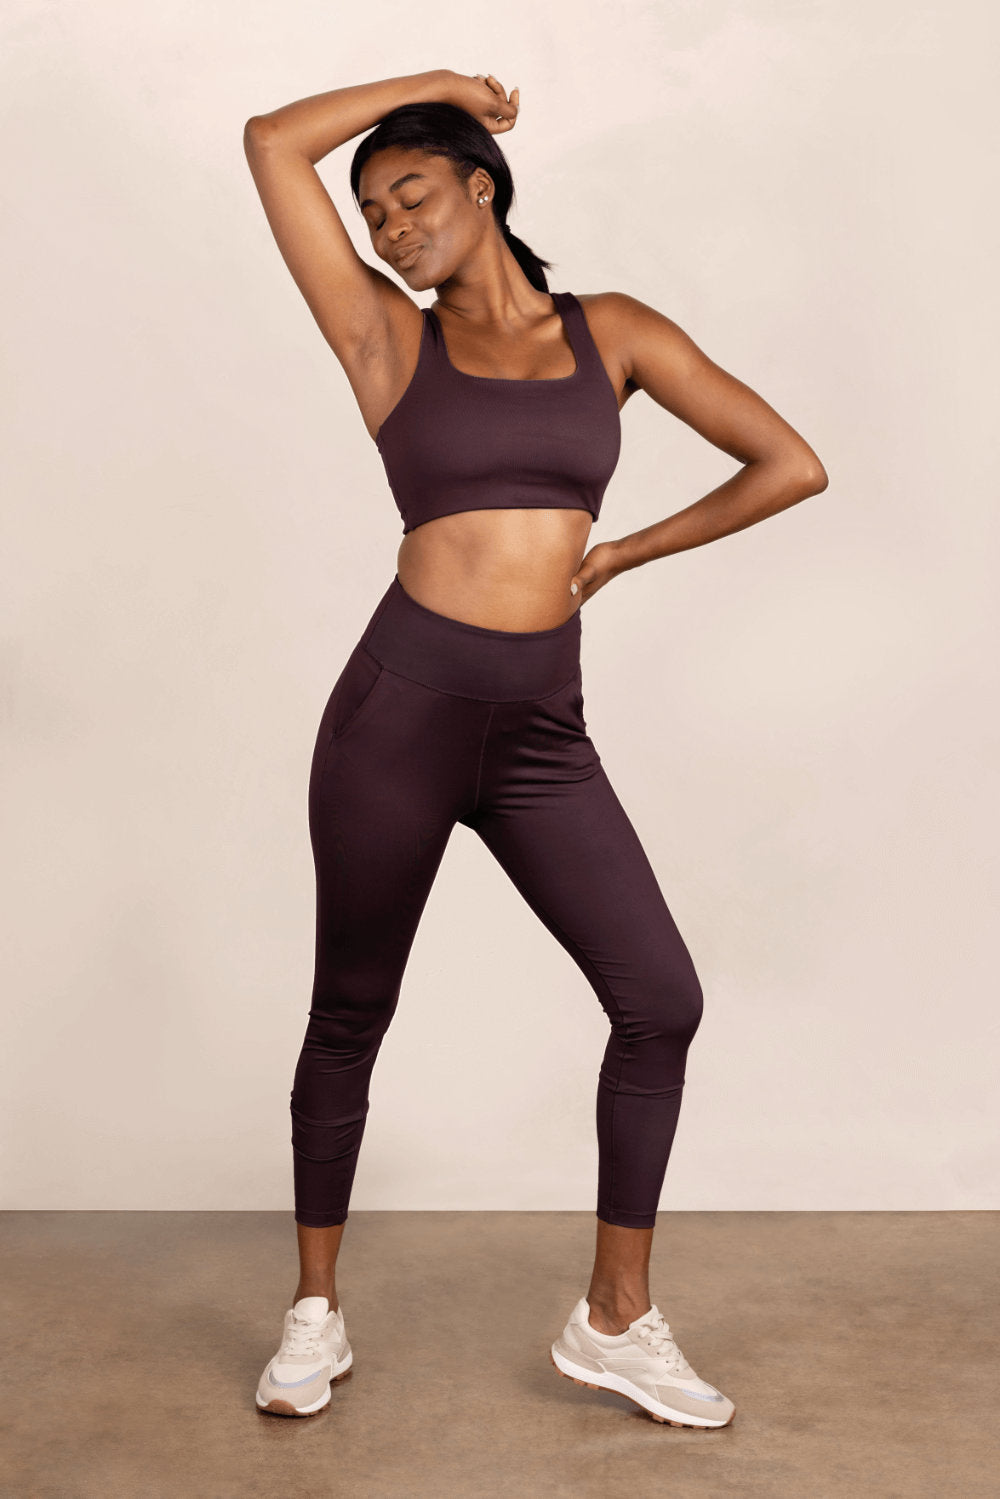 Woman in activewear